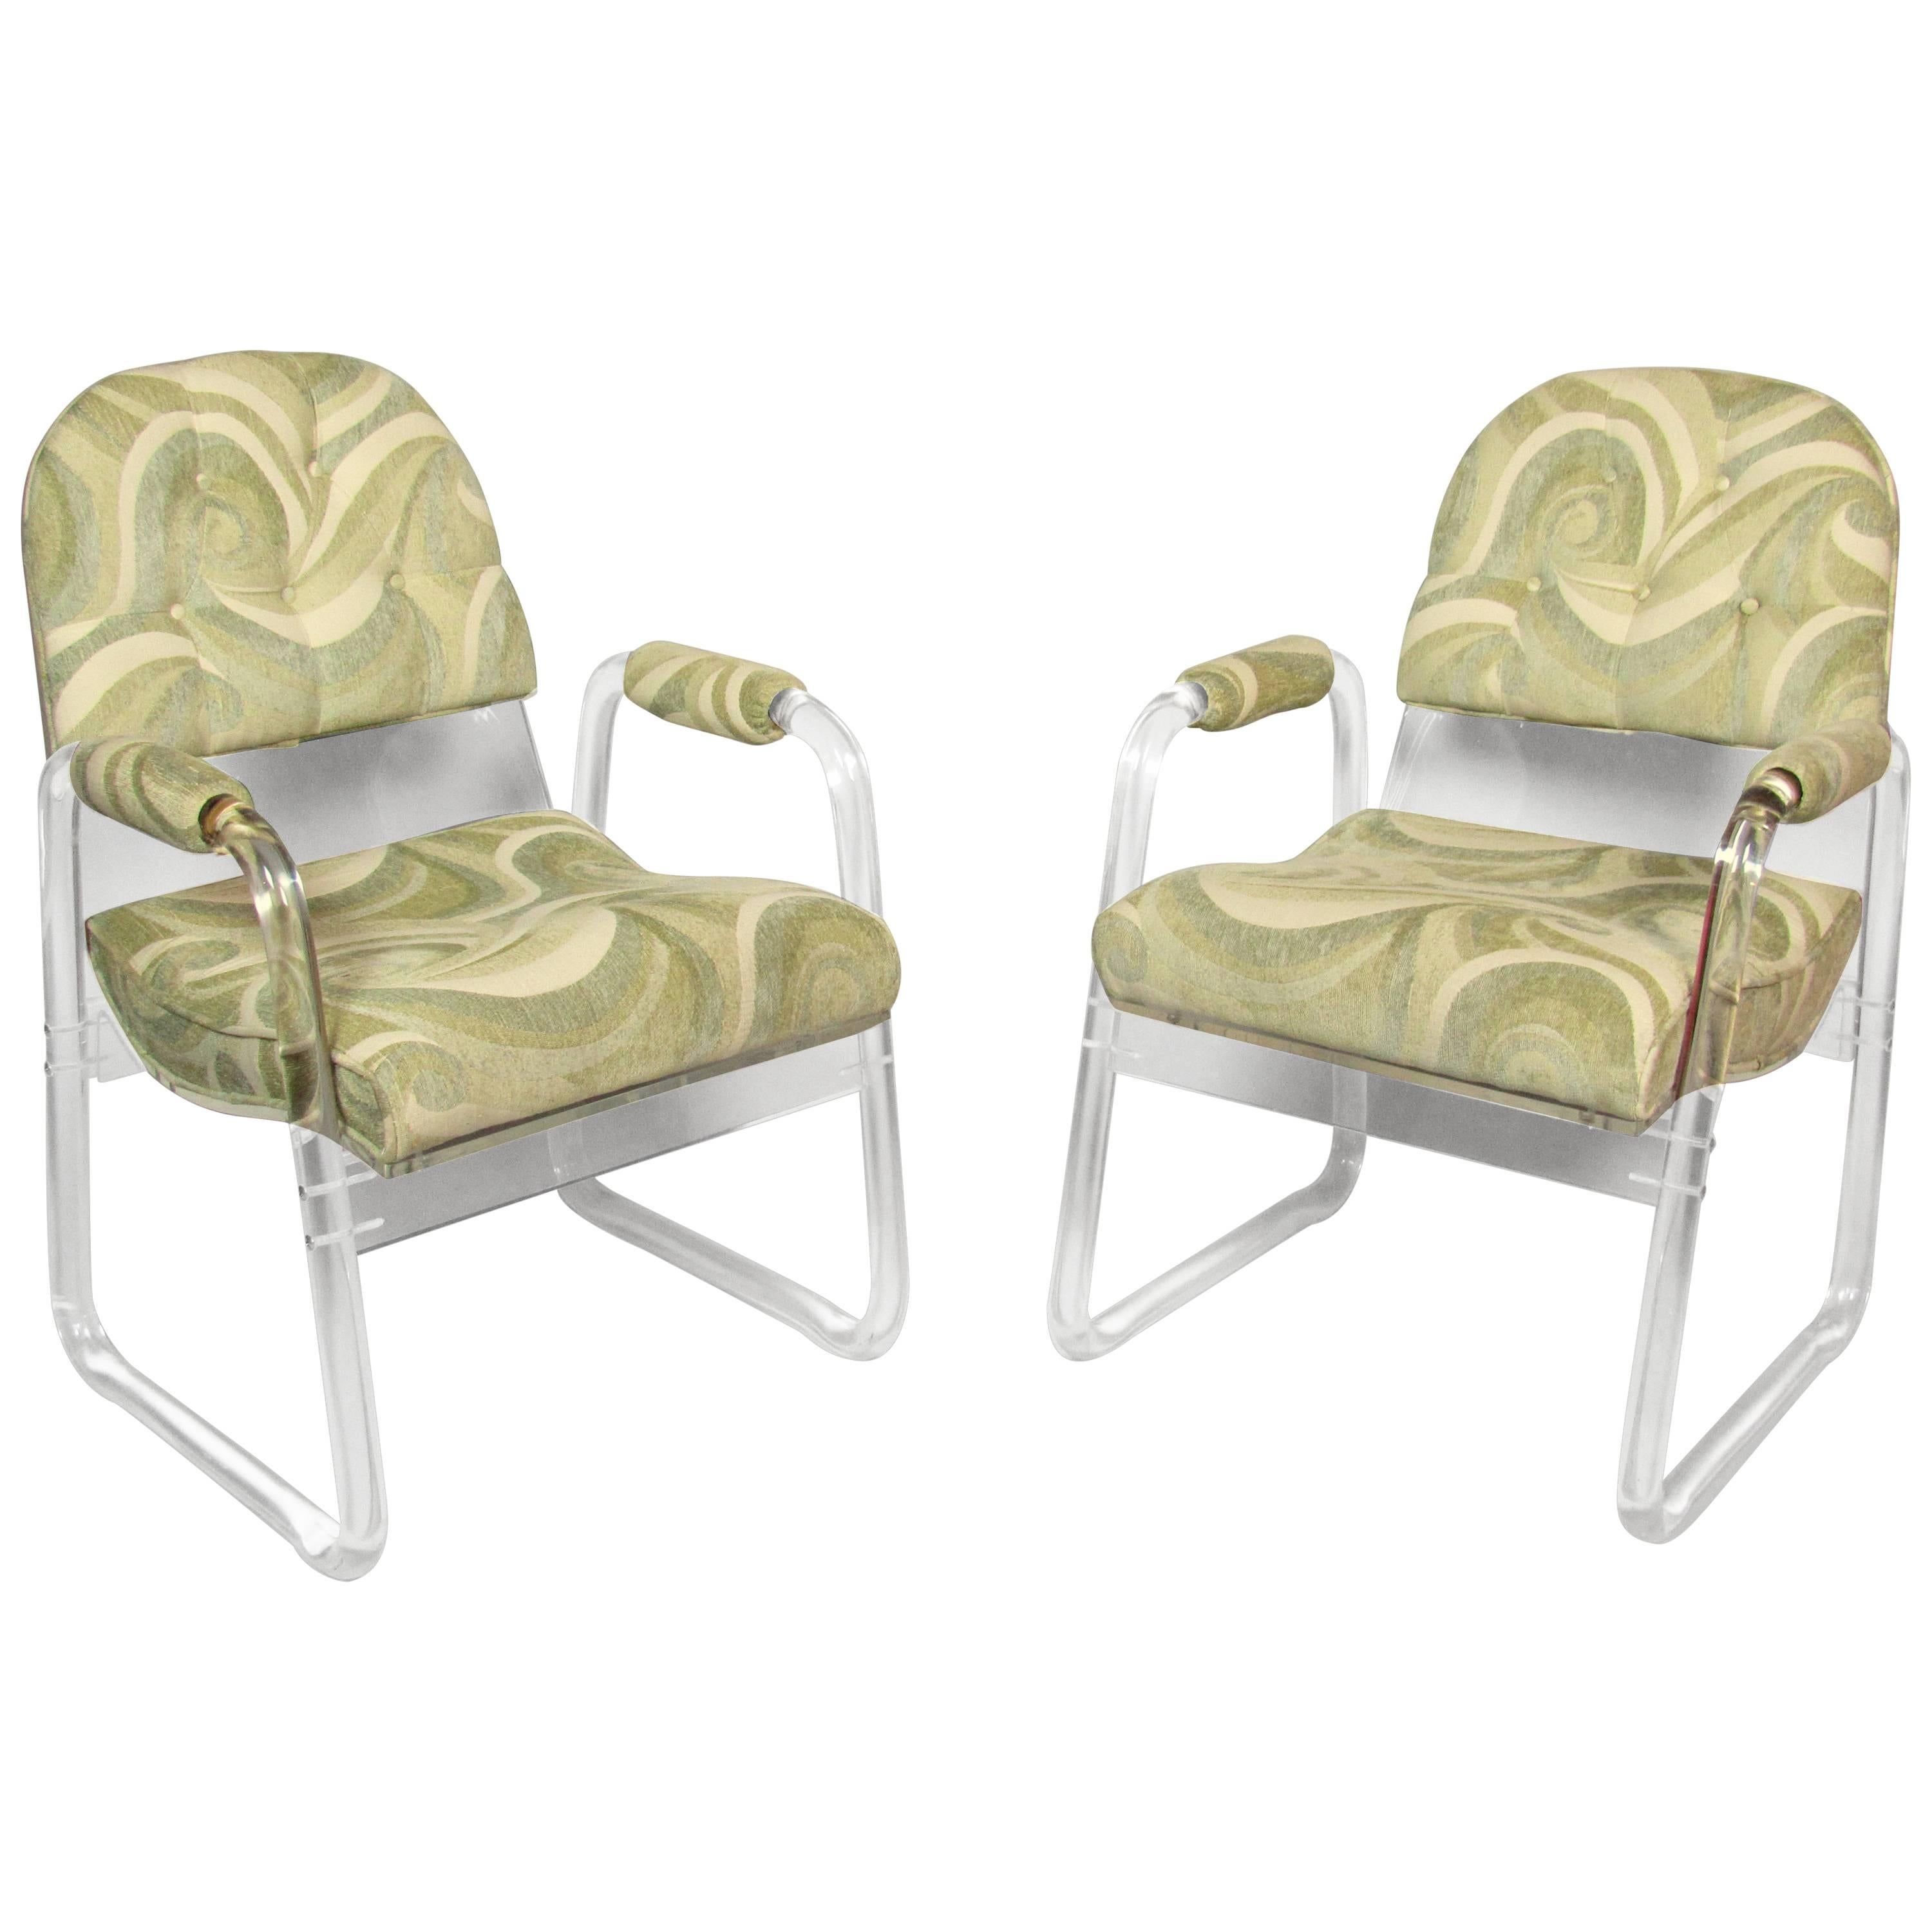 Pair of Lucite Lounge Chairs Hill Industries , circa 1970